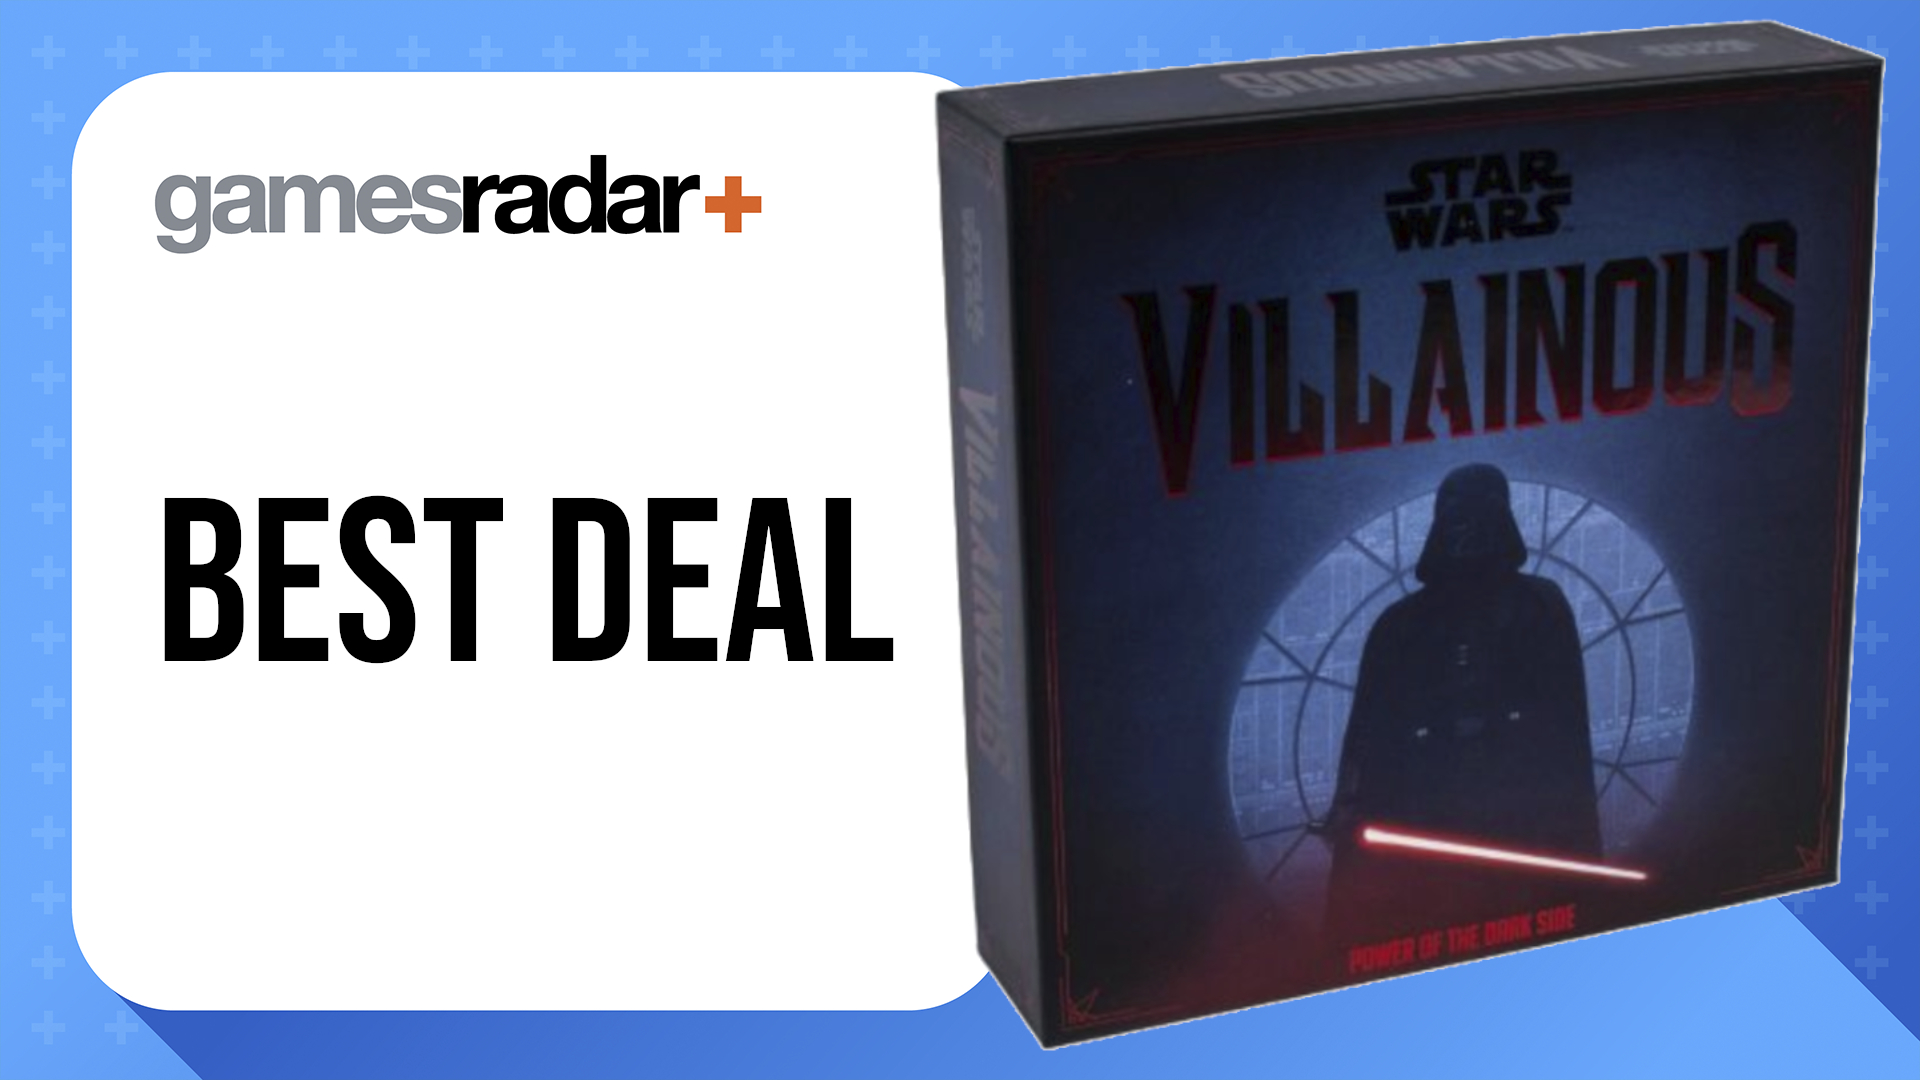 Cyber Monday board game deals with Star Wars Villainous